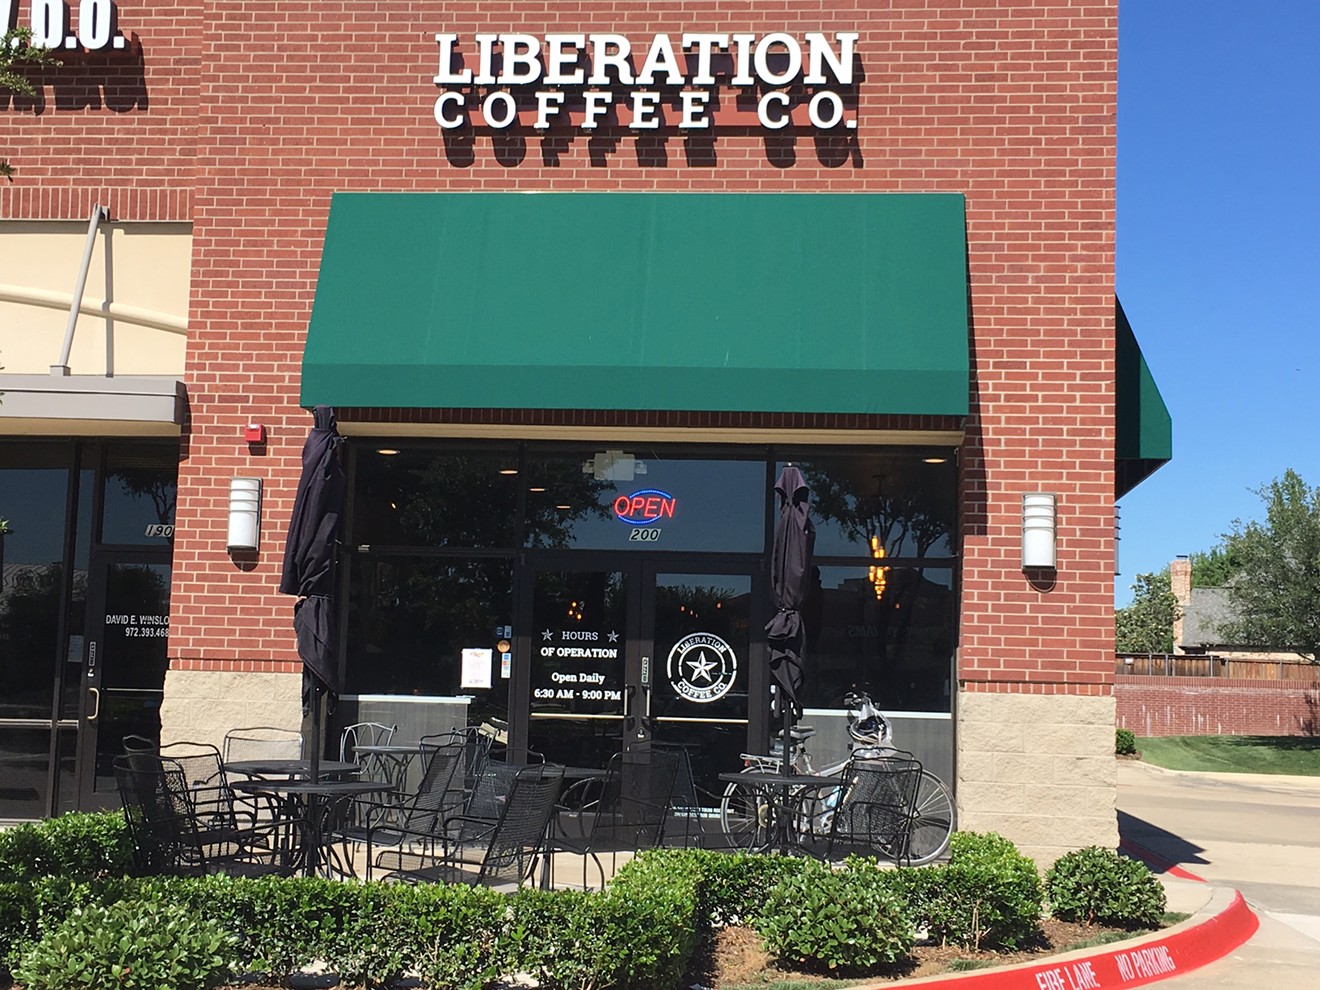 Liberation Coffee Co., like most businesses on Coppell's Denton Tap Road, is part of an archetypically suburban retail strip.